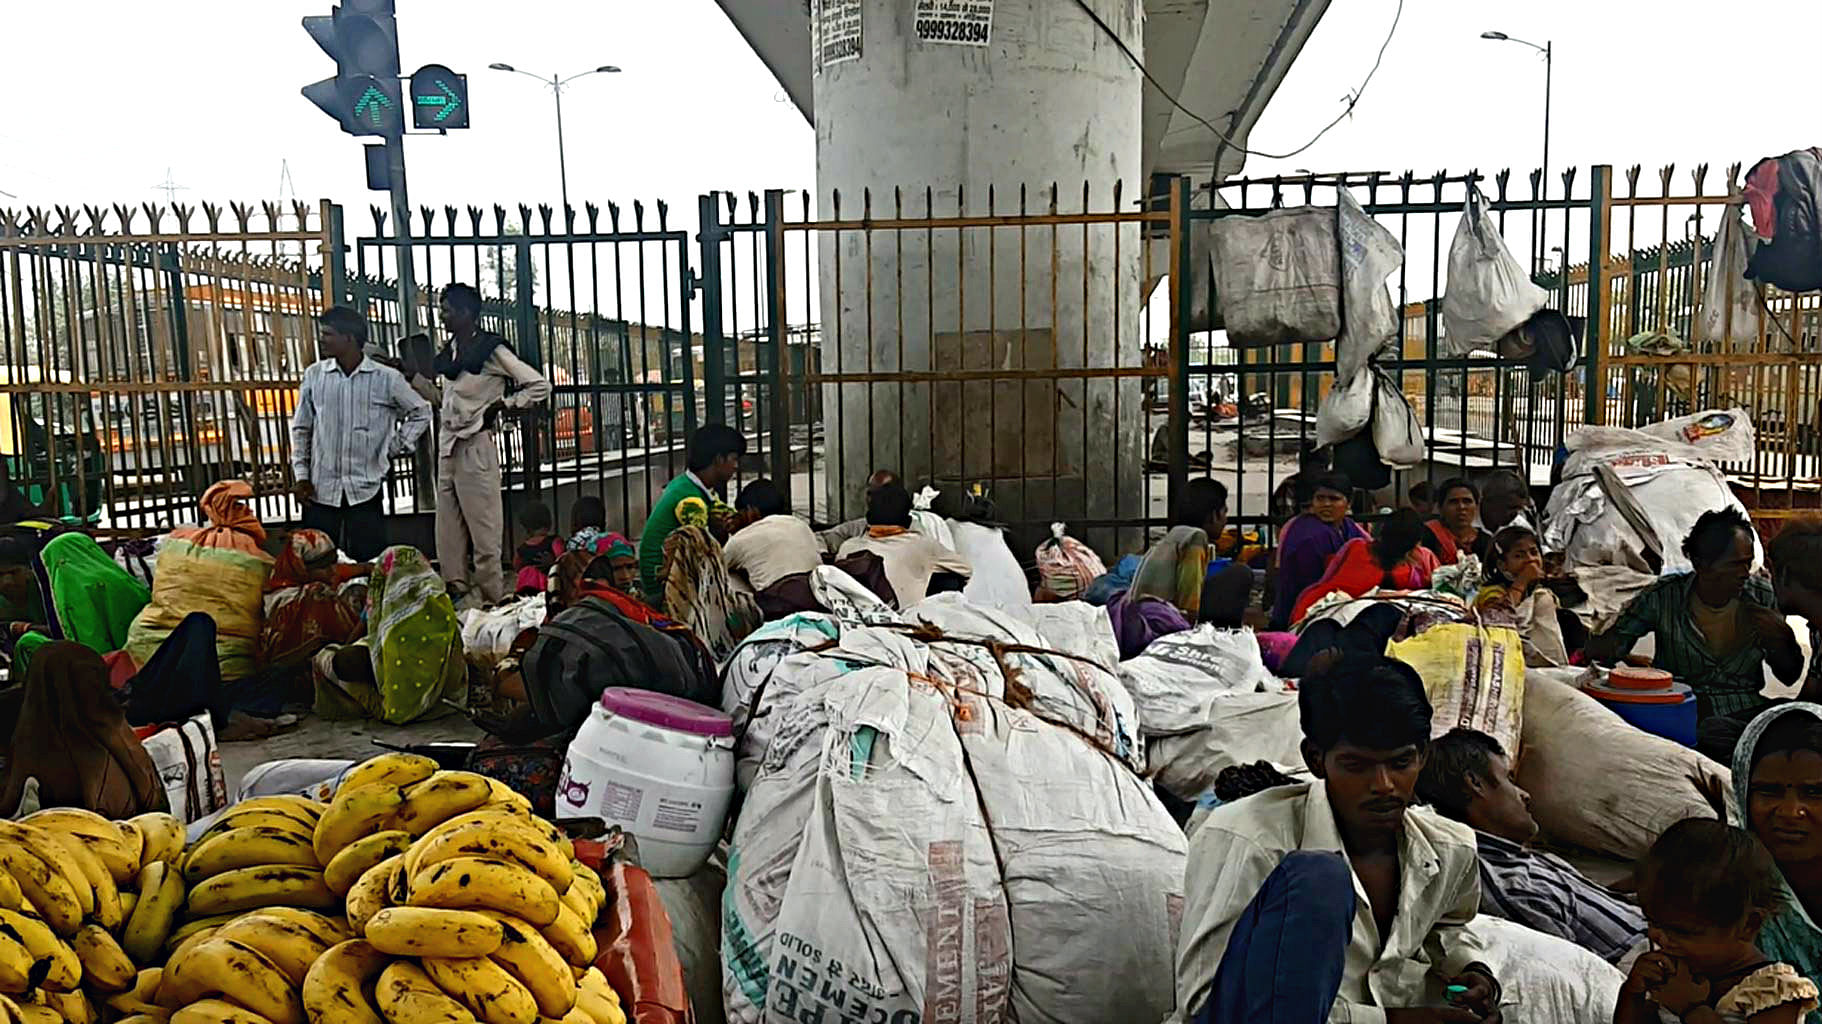 Hundreds of farmers from the Bundelkhand belt in Madhya Pradesh and Uttar Pradesh migrate to Delhi looking for work.(Photo: The Quint/Maanvi)